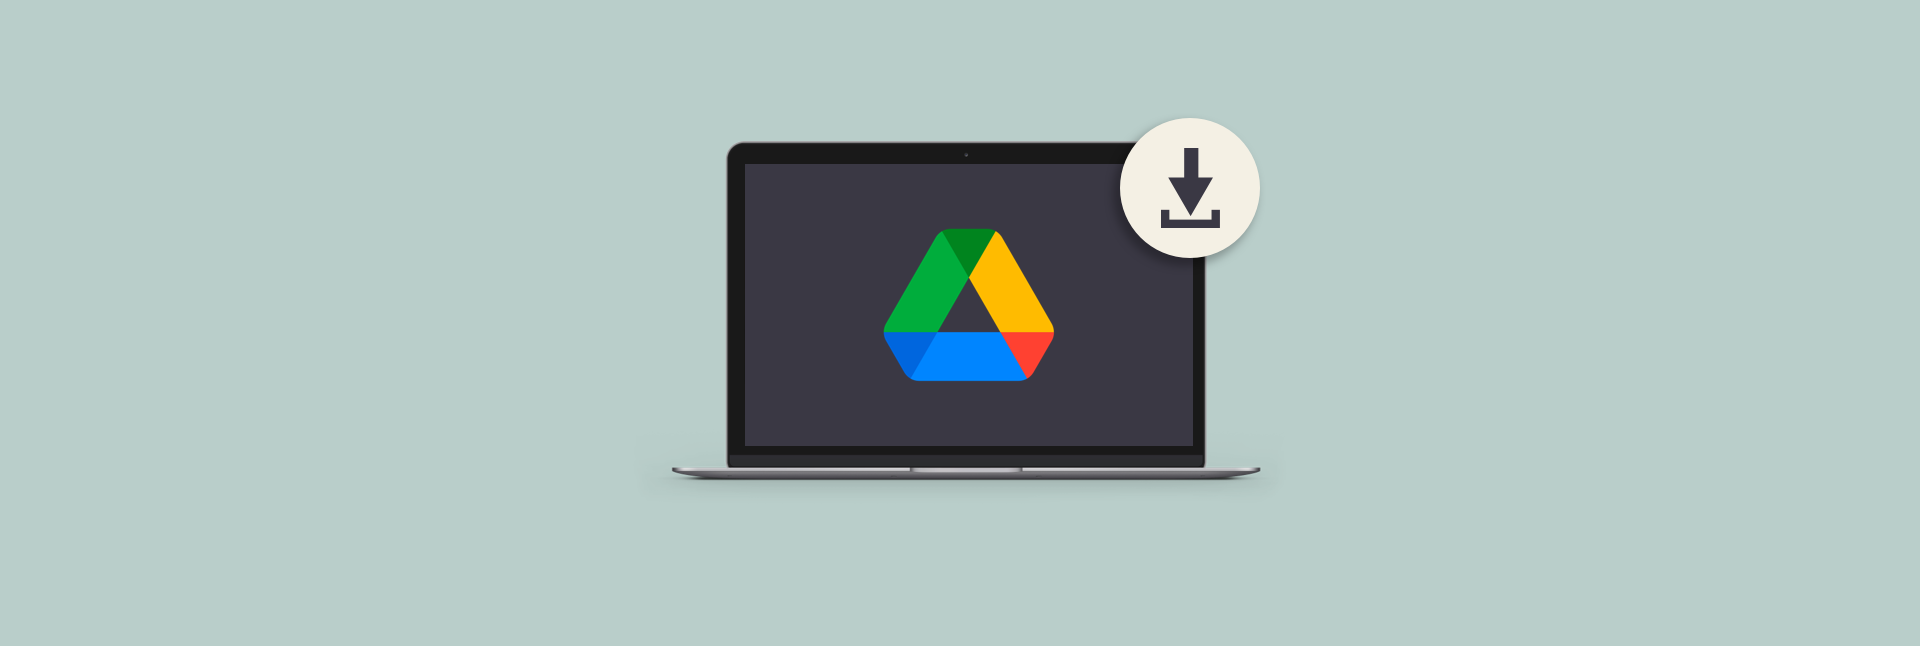 how to download photos to google drive